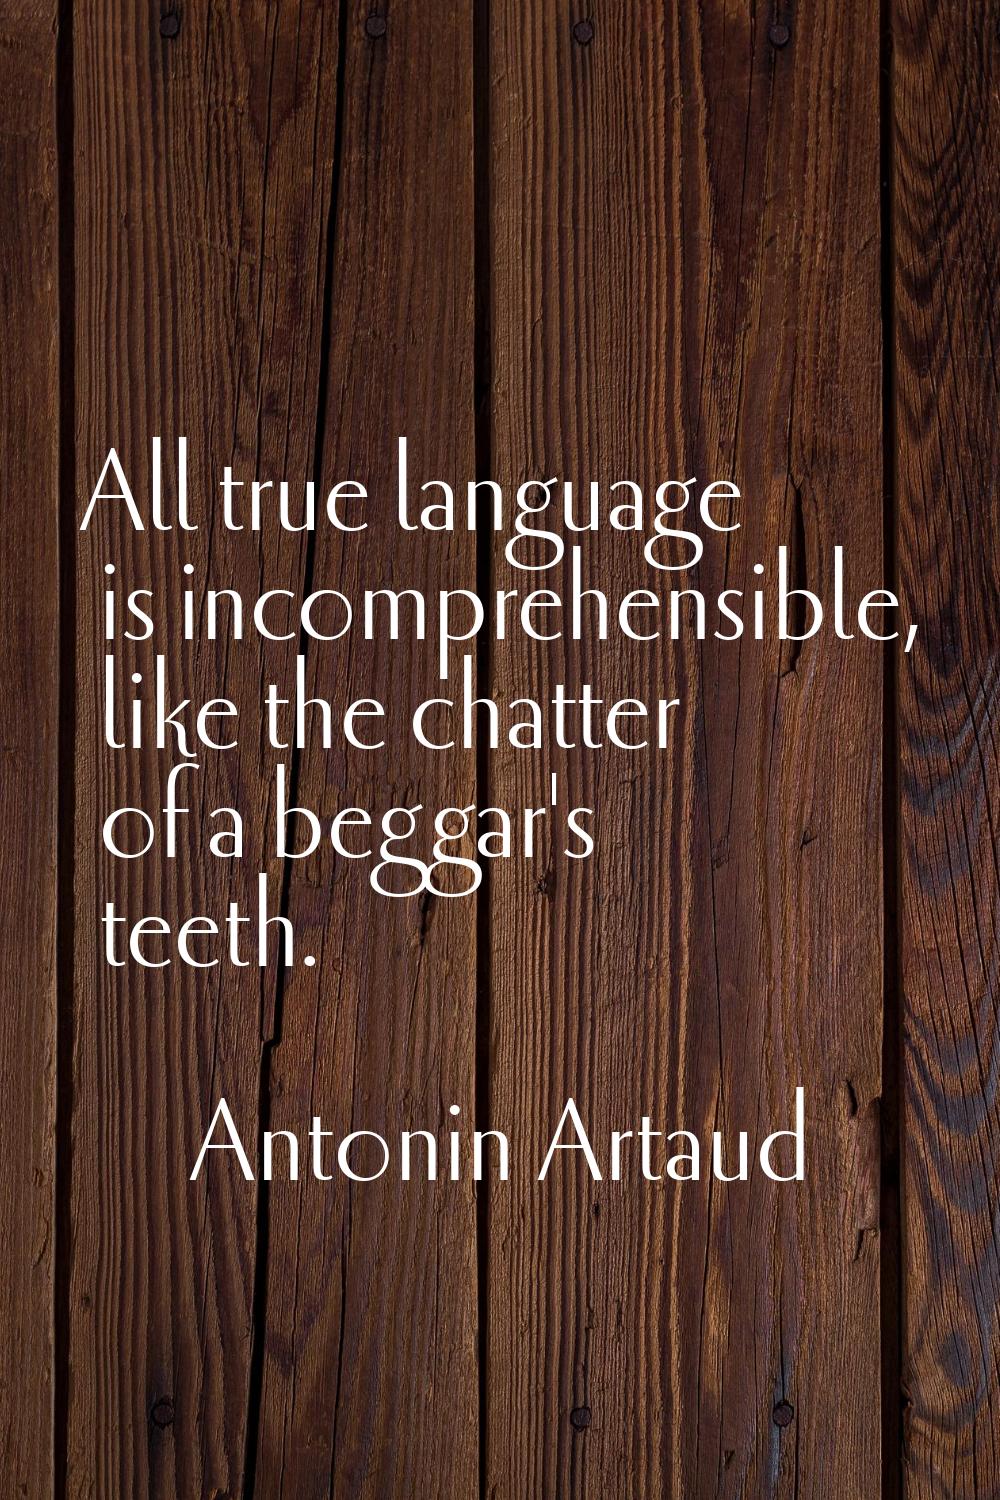 All true language is incomprehensible, like the chatter of a beggar's teeth.